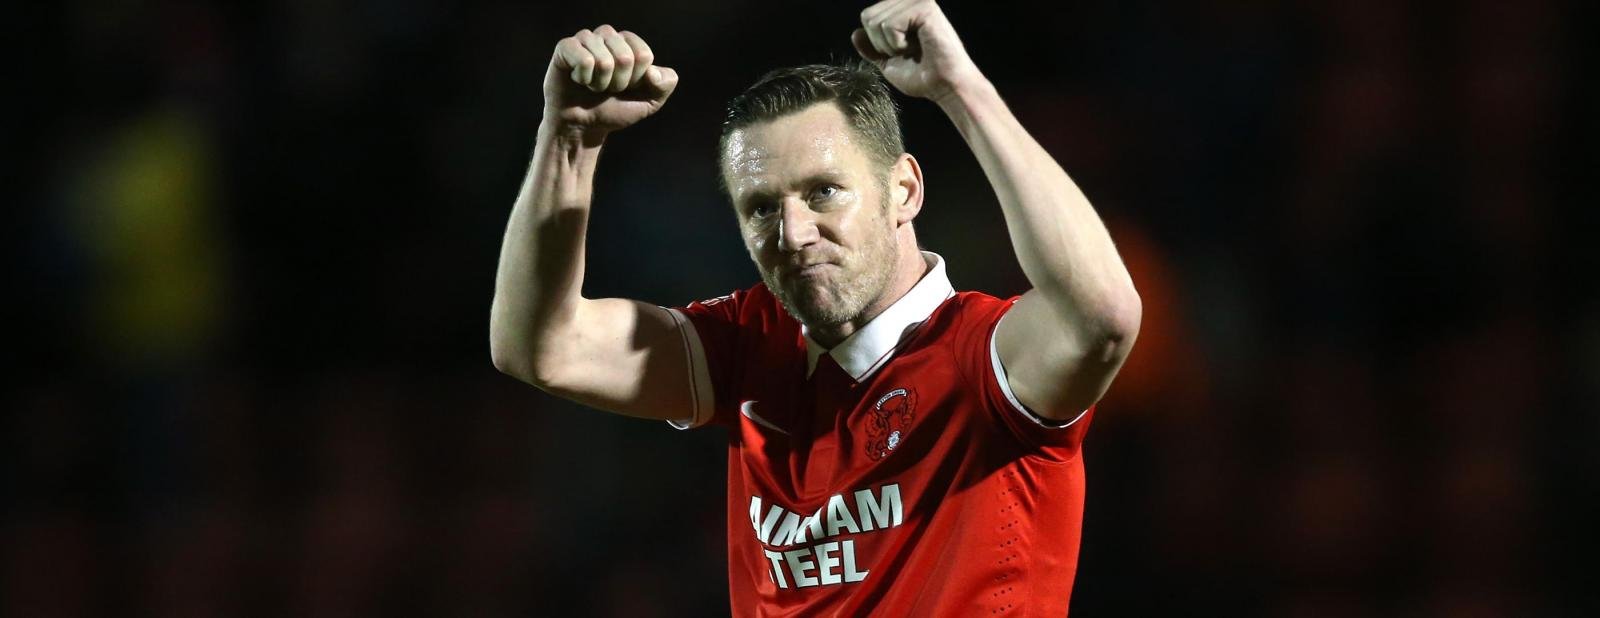 League Two Round-Up: Orient move into the play-offs as Nolan maintains 100% record